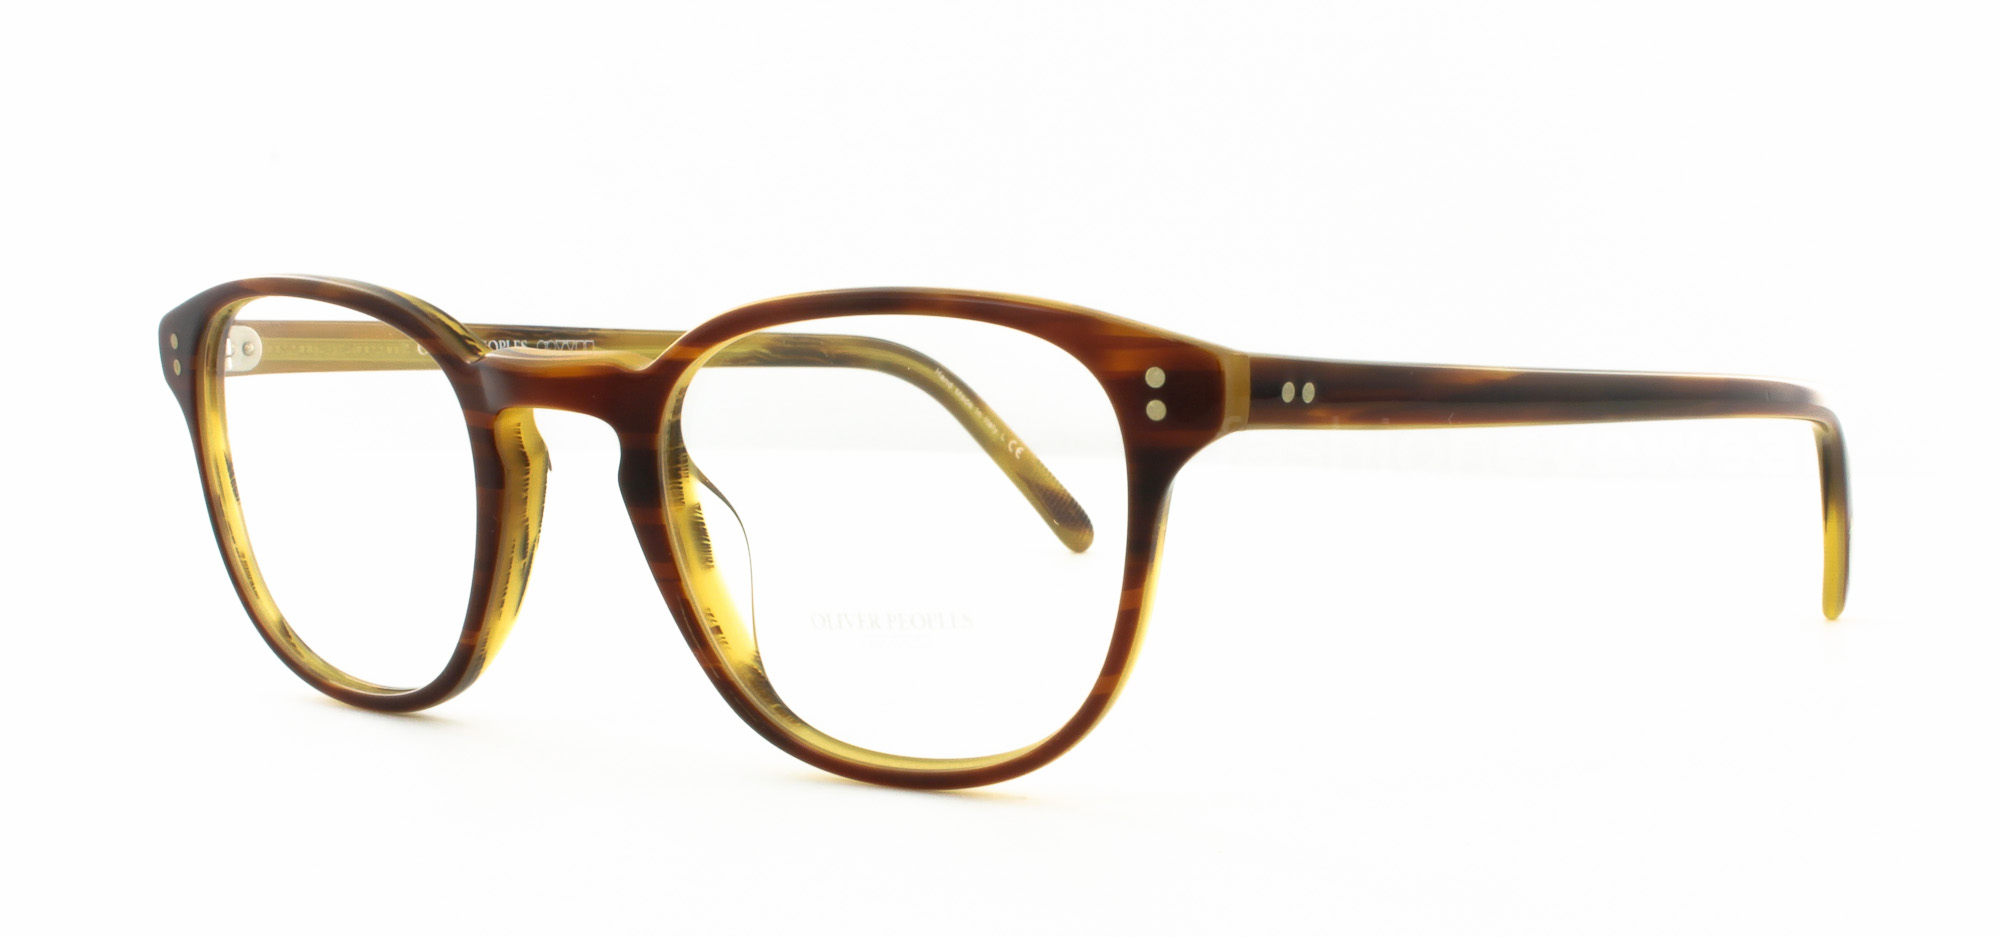 OLIVER PEOPLES FAIRMONT 1310